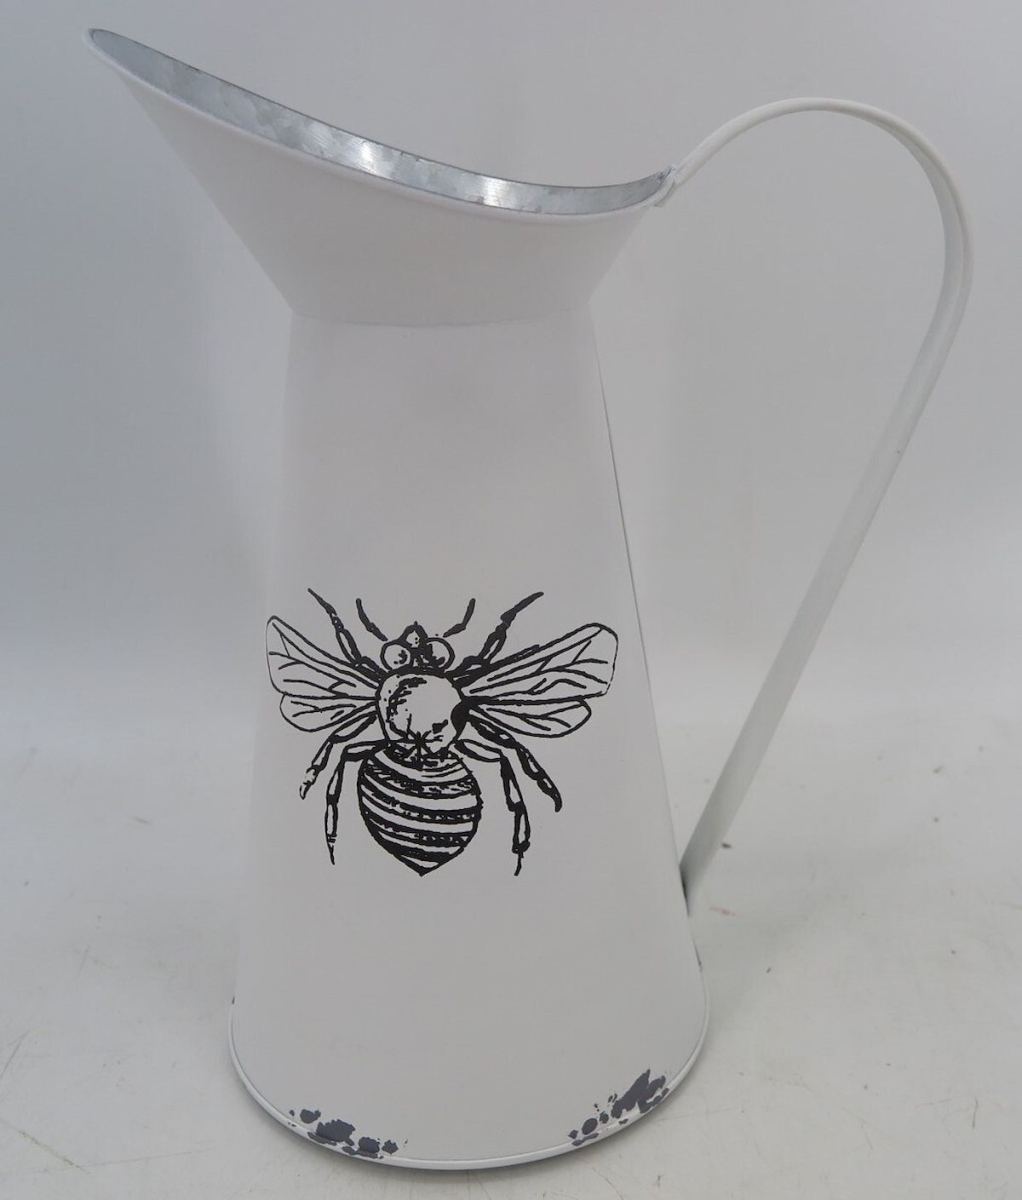 Picture of 212 Main AI-GA92-420 Jug Shaped White Metal with Black Bee Planter